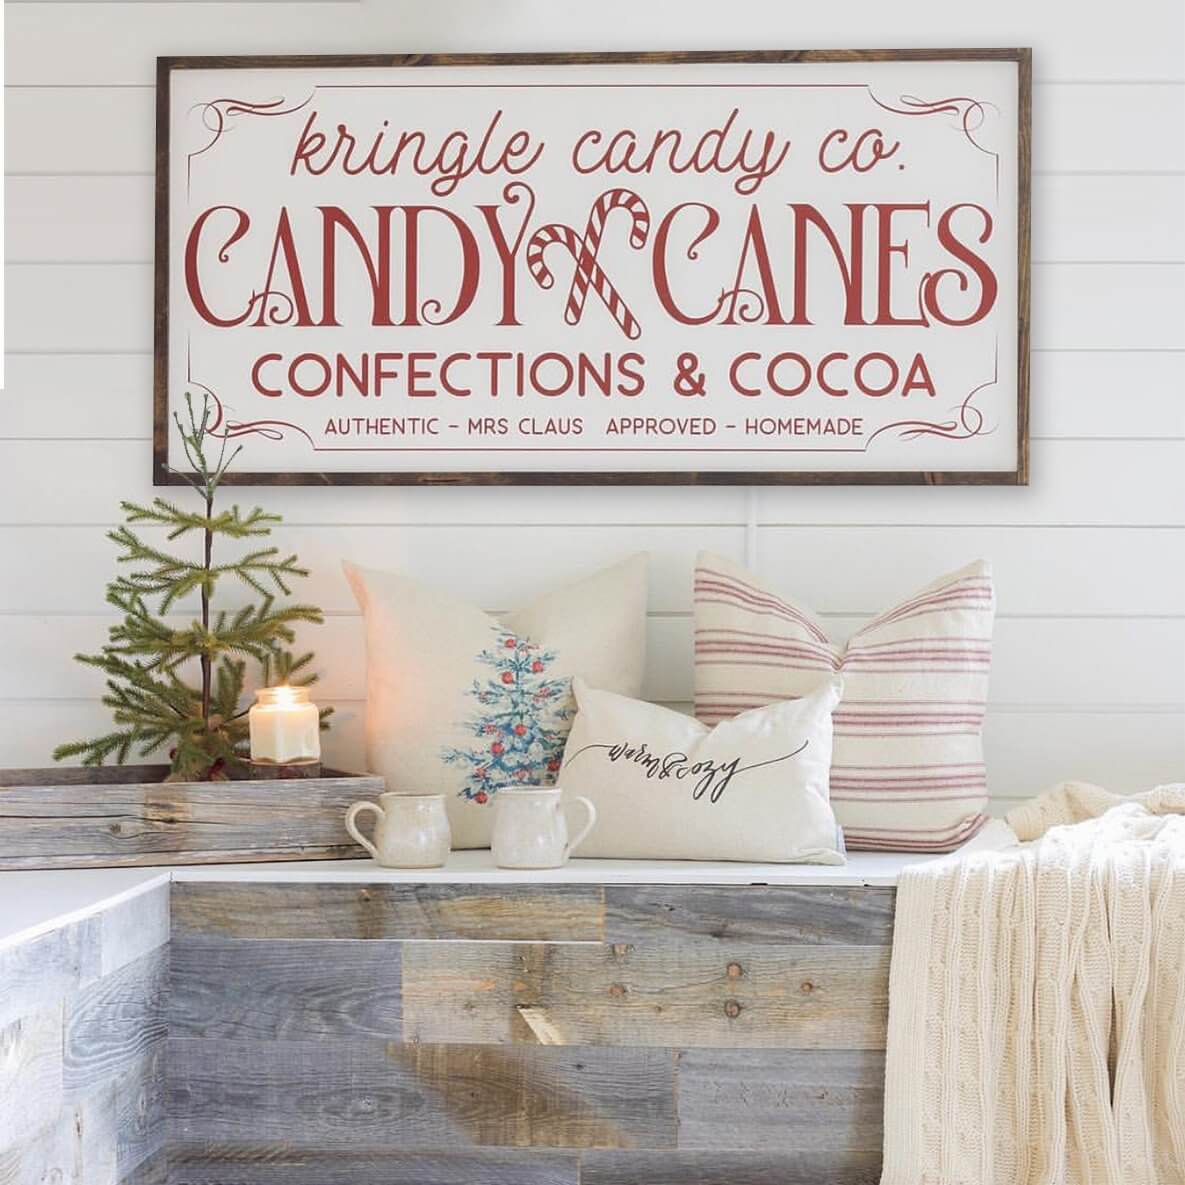 Vintage-styled Kringle Candy Co. Sign